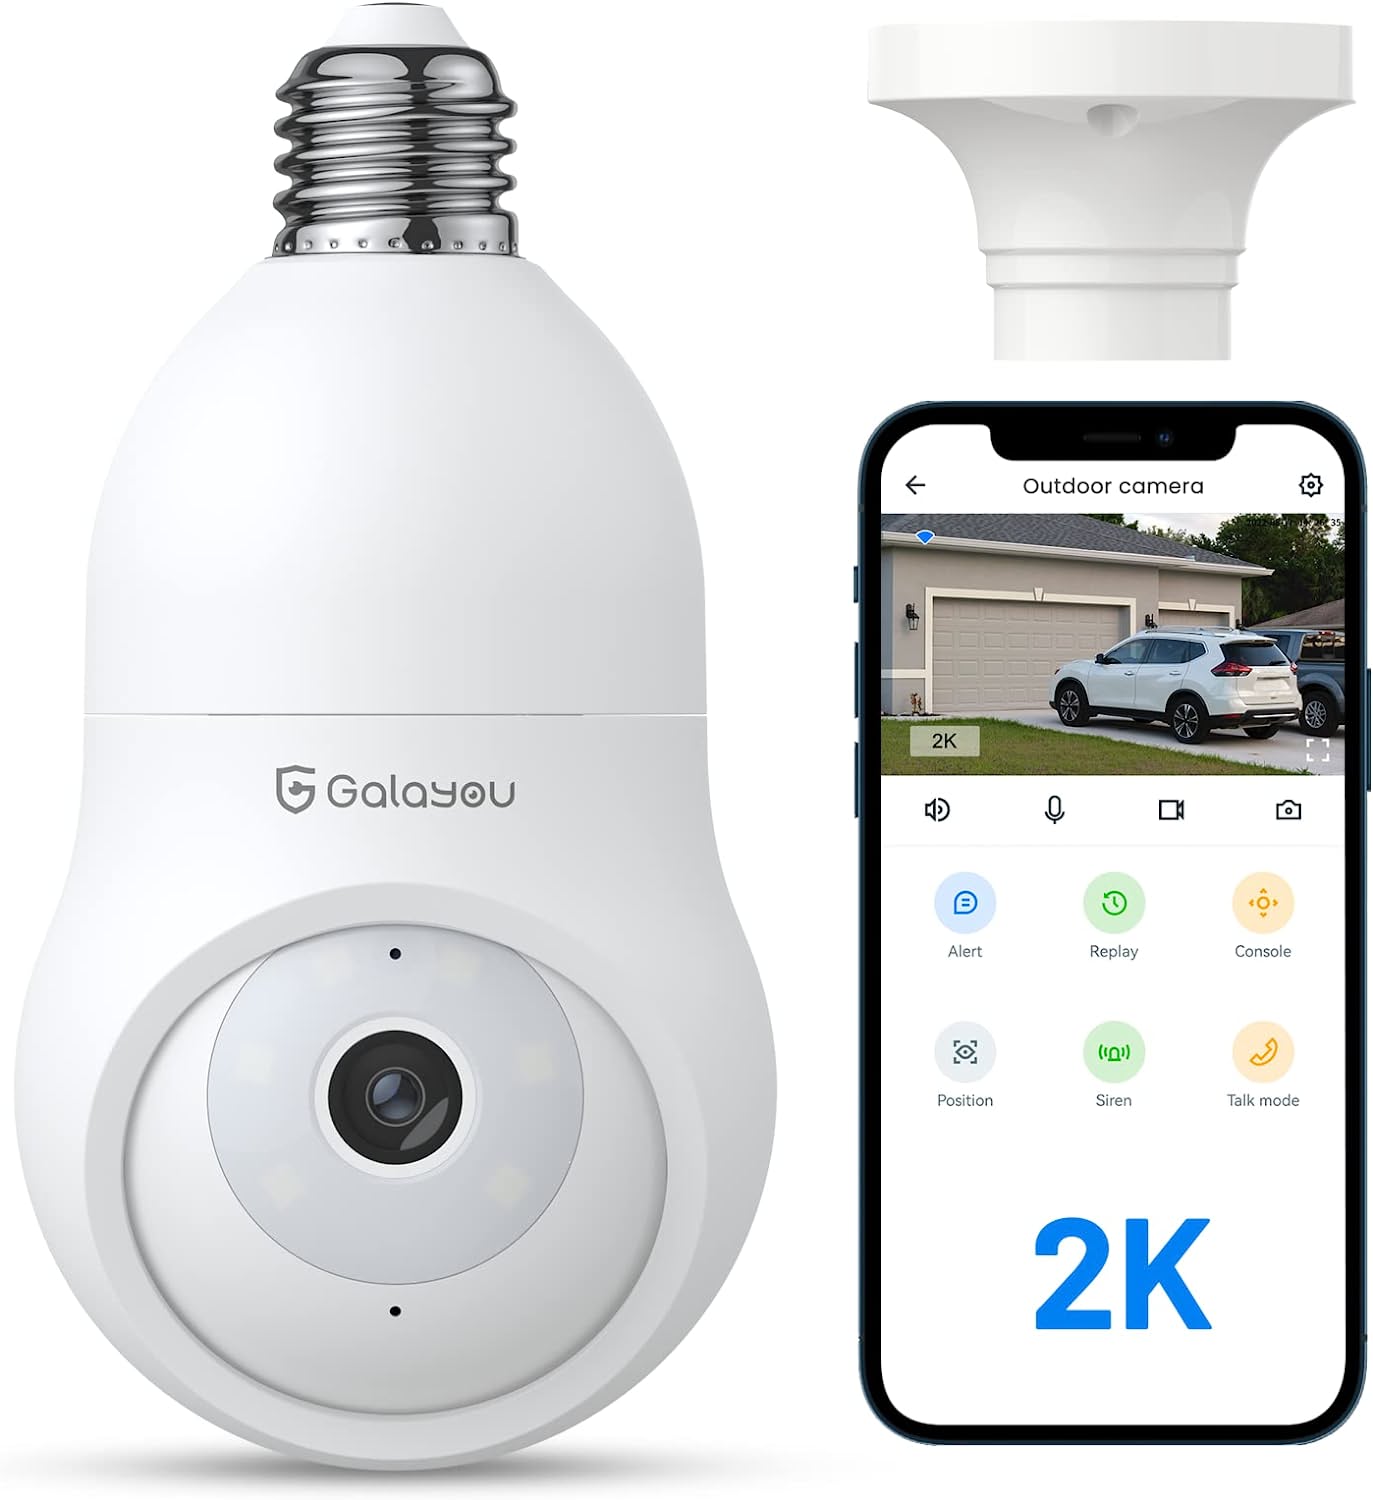 Galayou Security Cameras for Sale in Phoenix, AZ - OfferUp